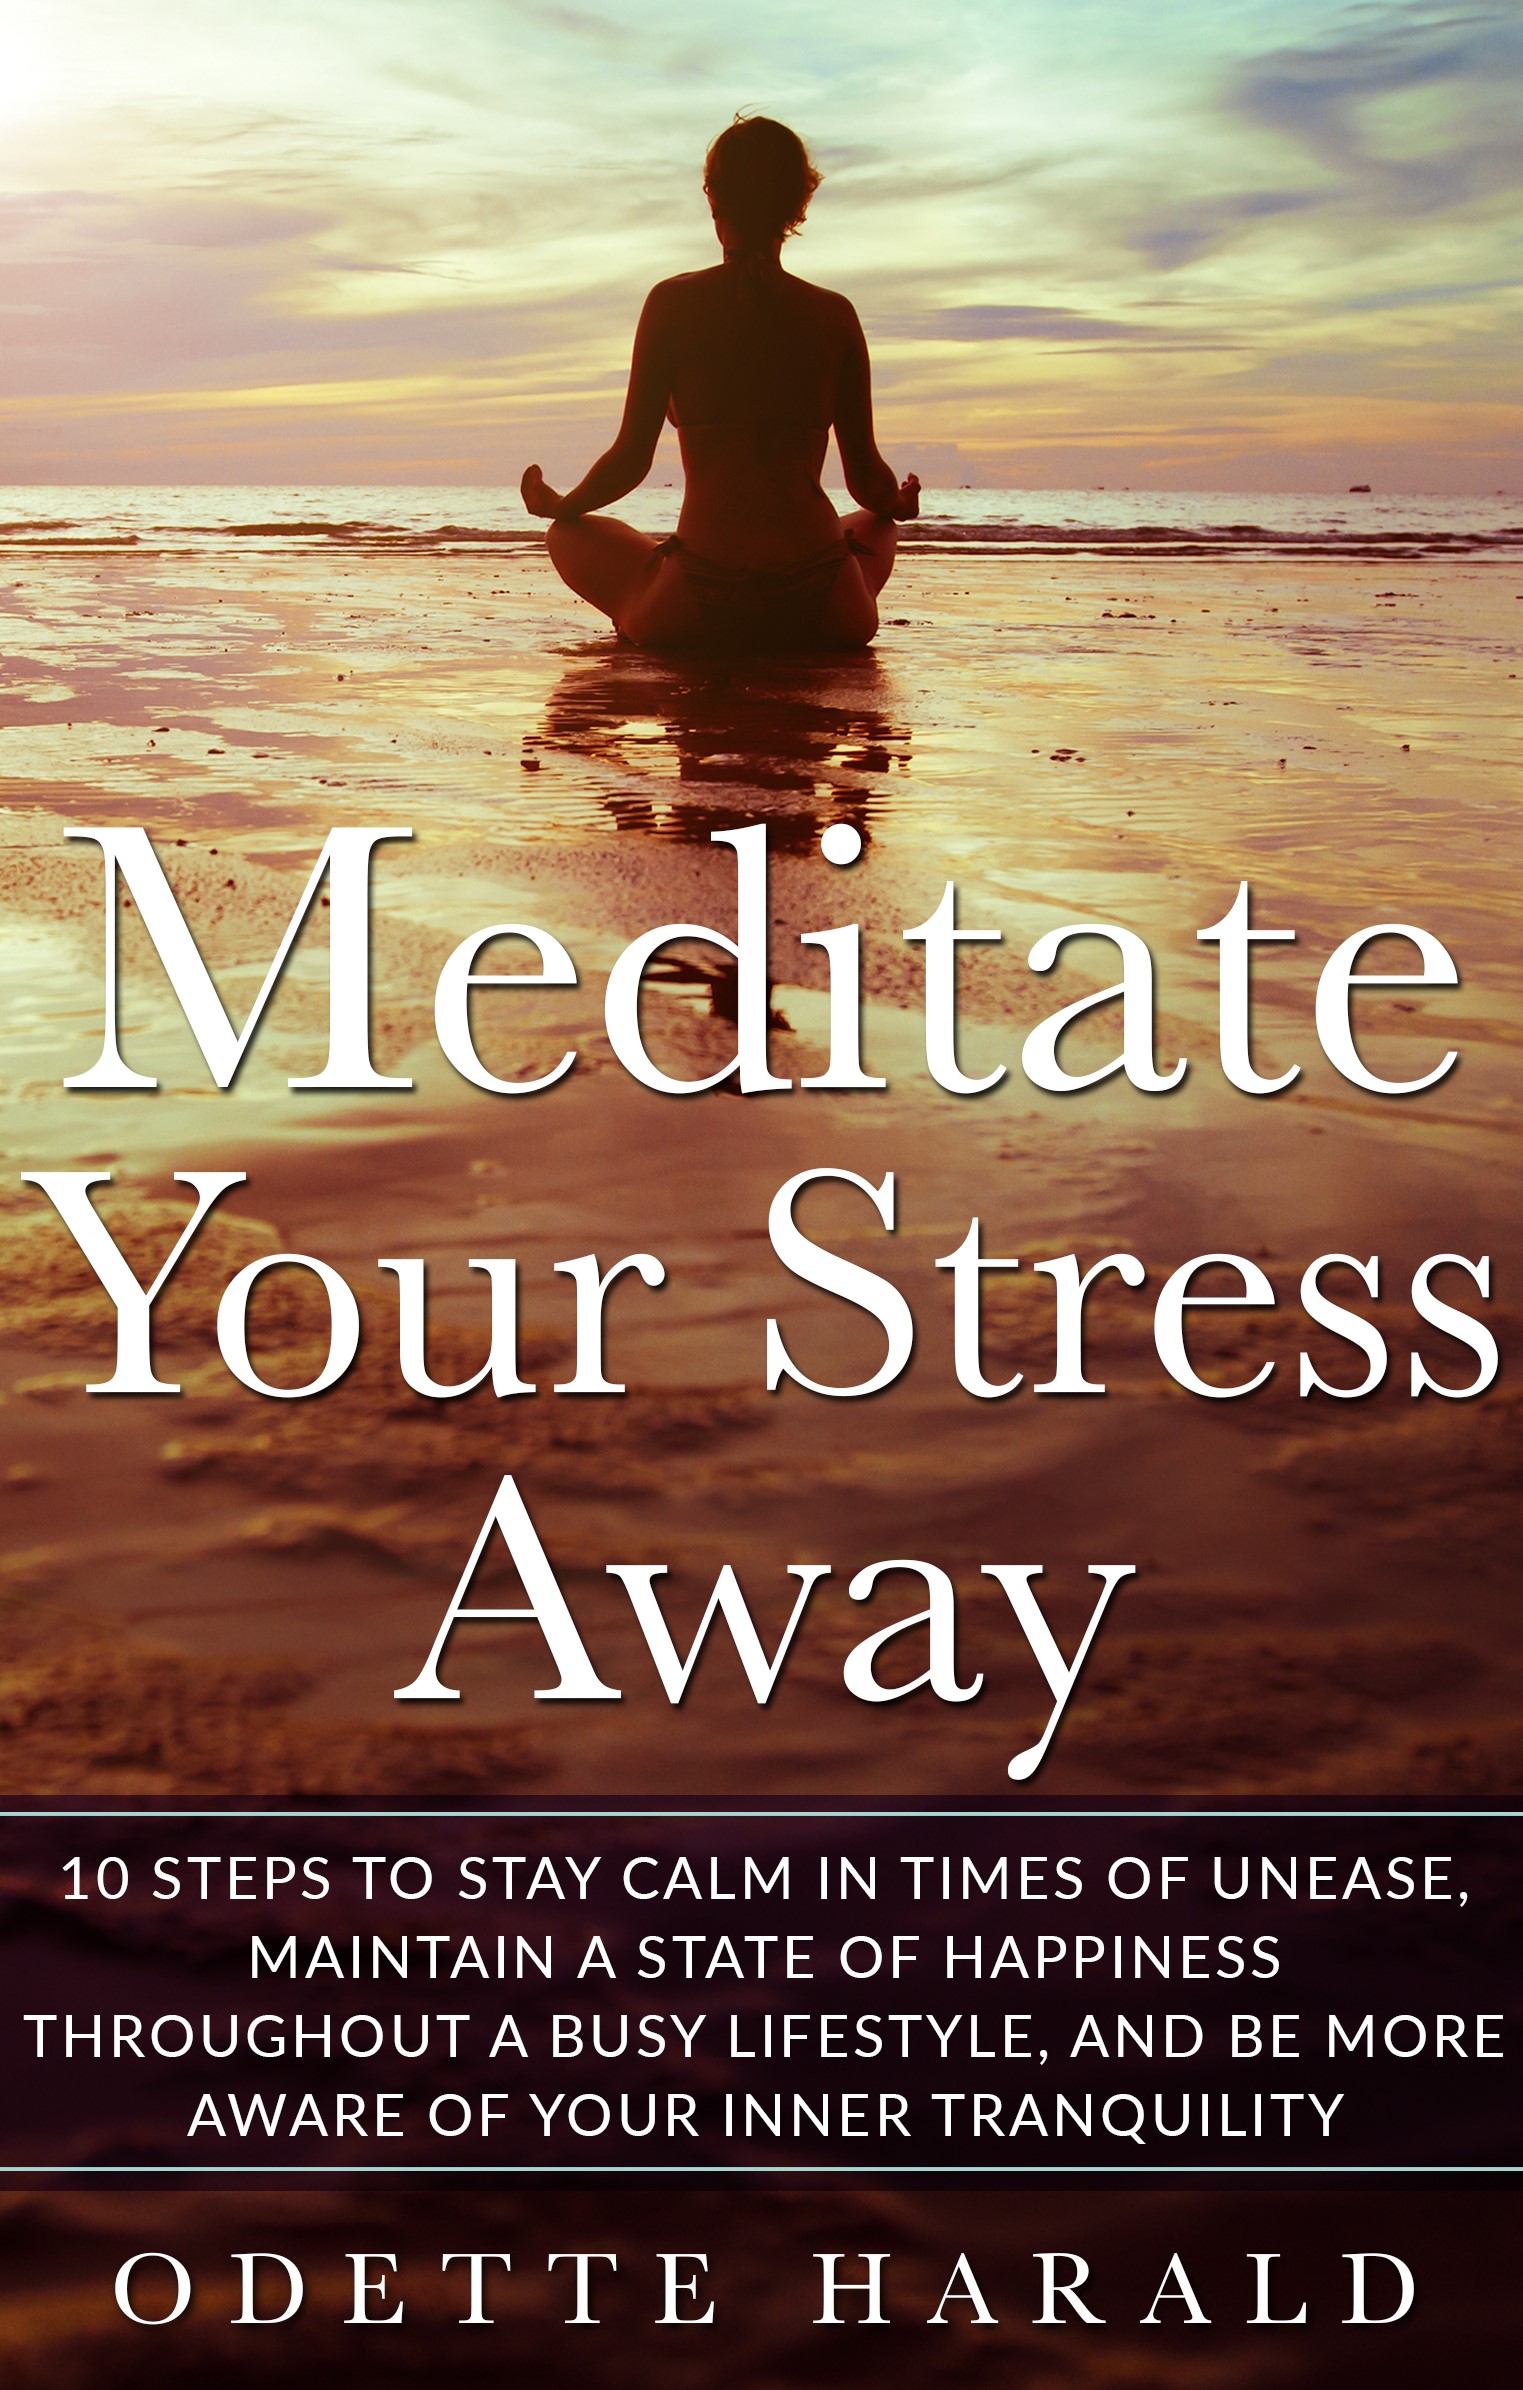 FREE: Meditate Your Stress Away by Odette Herald